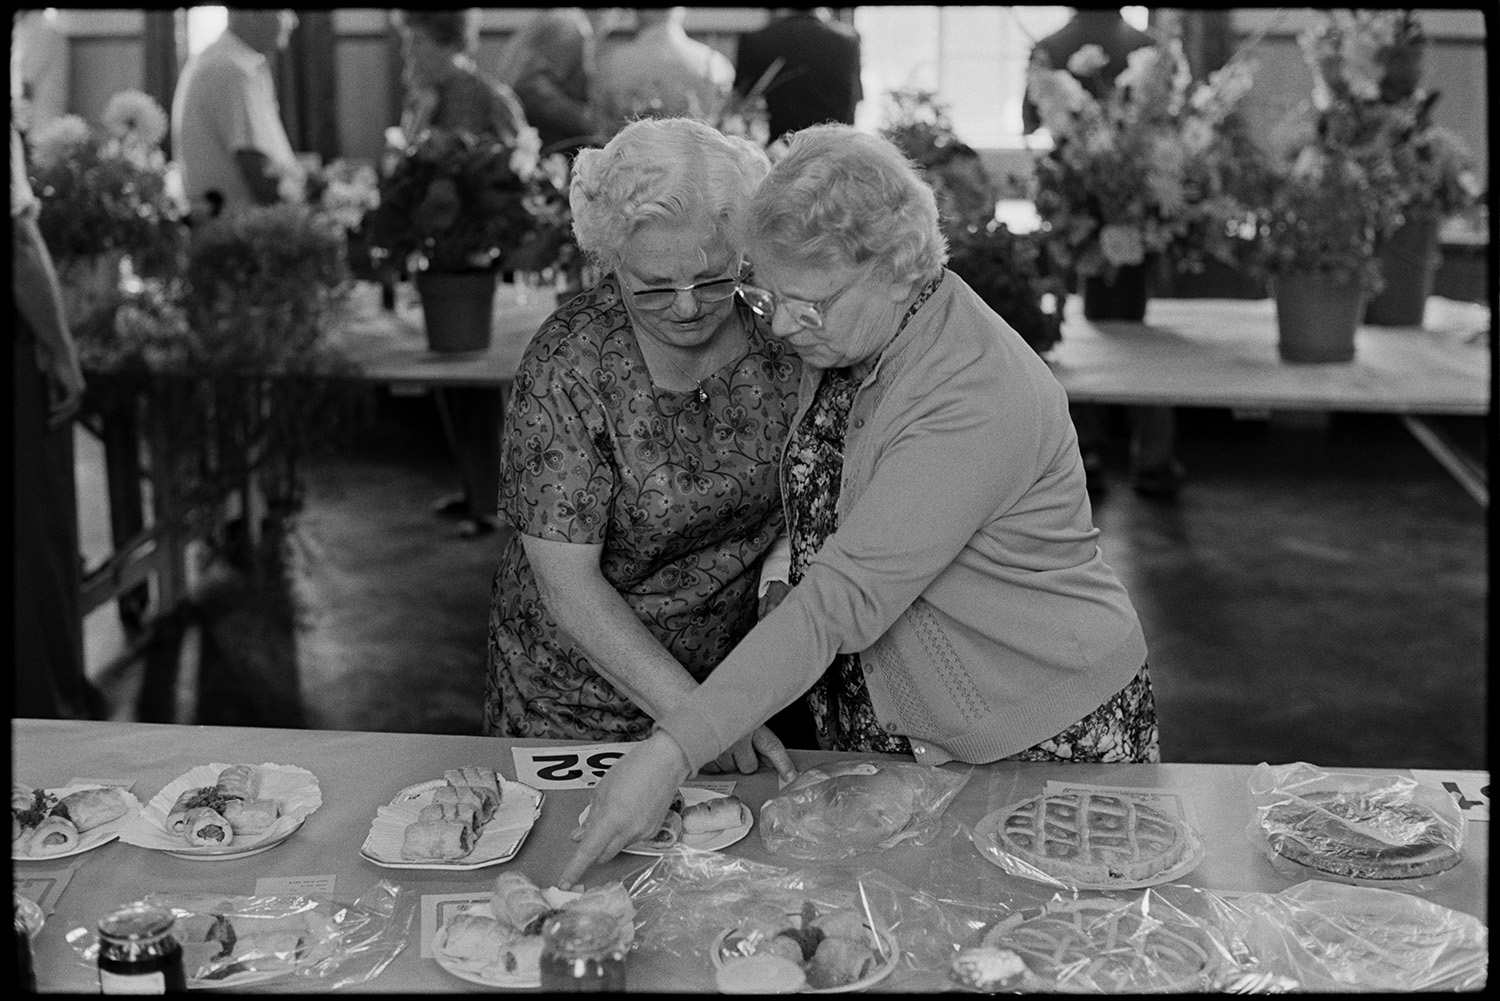 Flower show, people looking at exhibits, women looking at cake, paintings on display.
[Two women looking at exhibits of sausage rolls and flans or tarts on a table at Dolton Flower Show in Dolton Village Hall. A table of floral exhibits is visible in the background.]